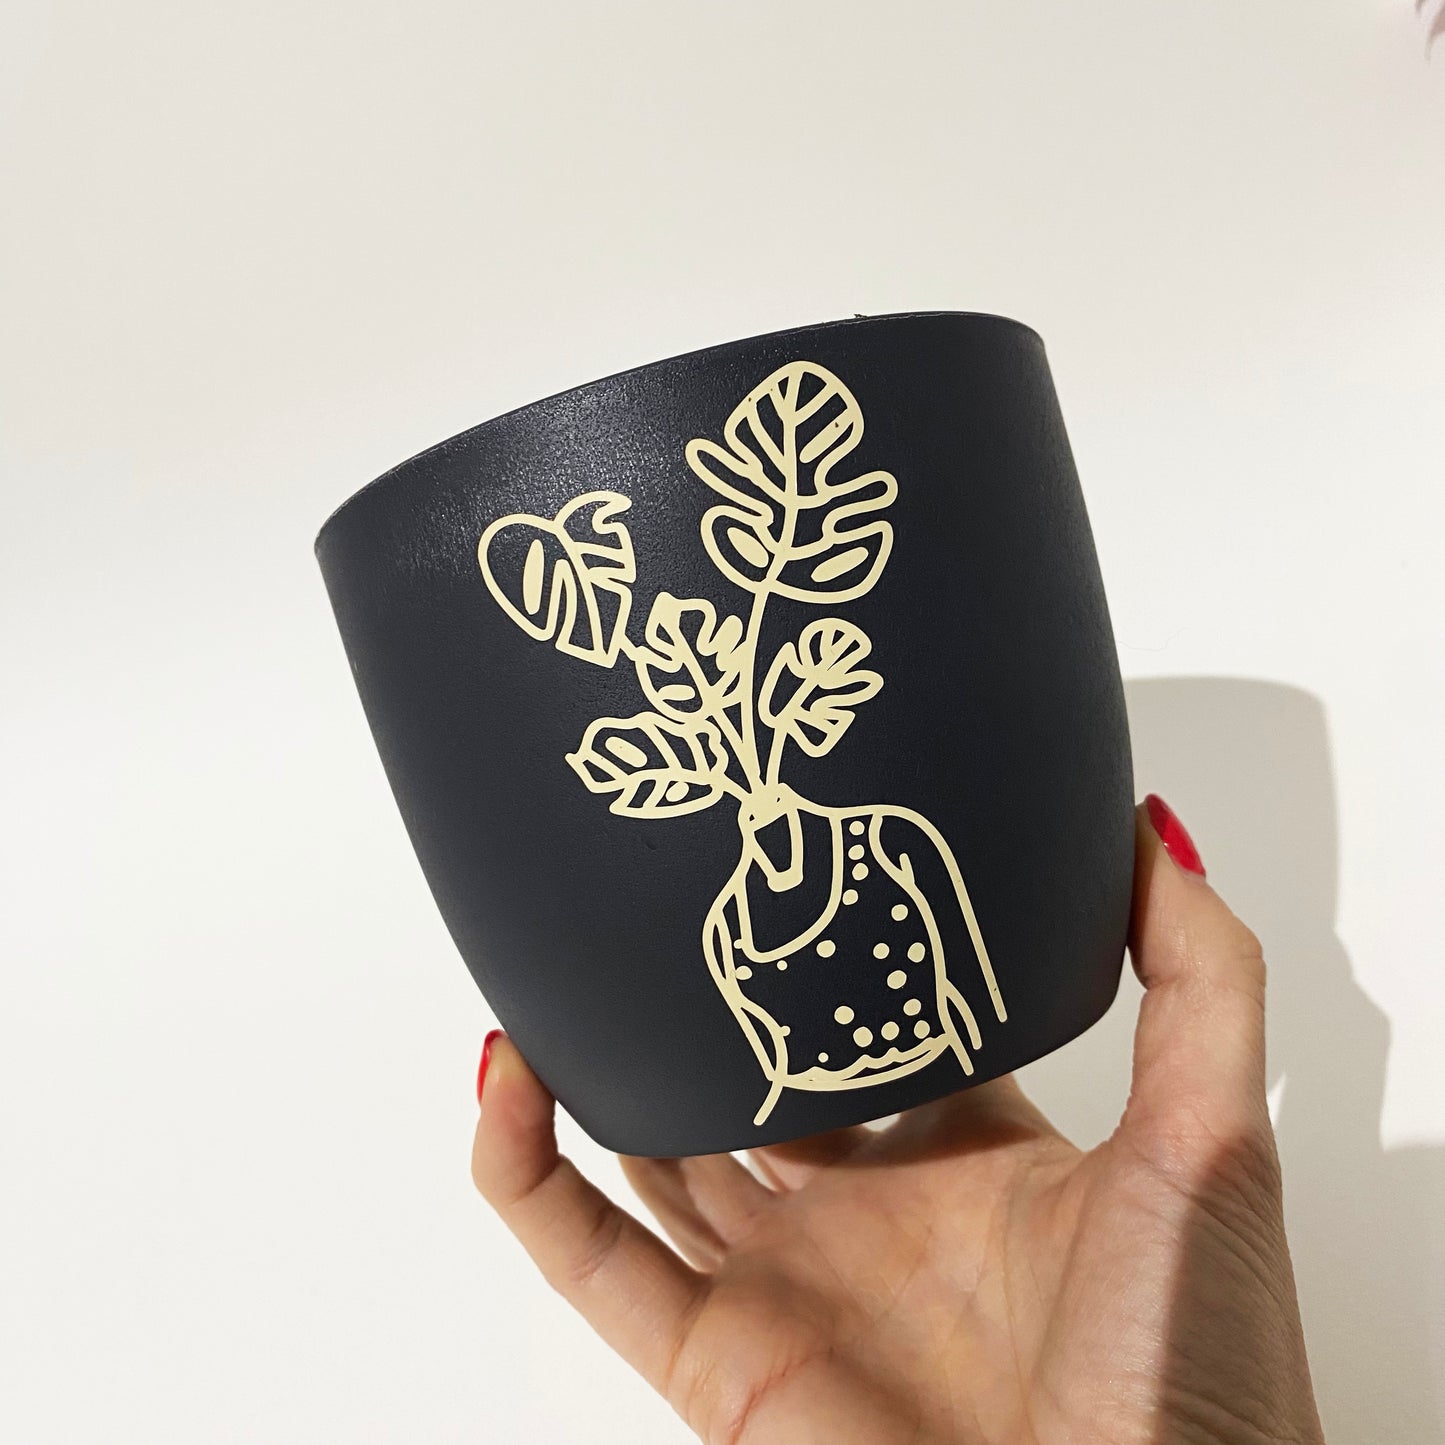 House 'Plant Lady' pot in Black